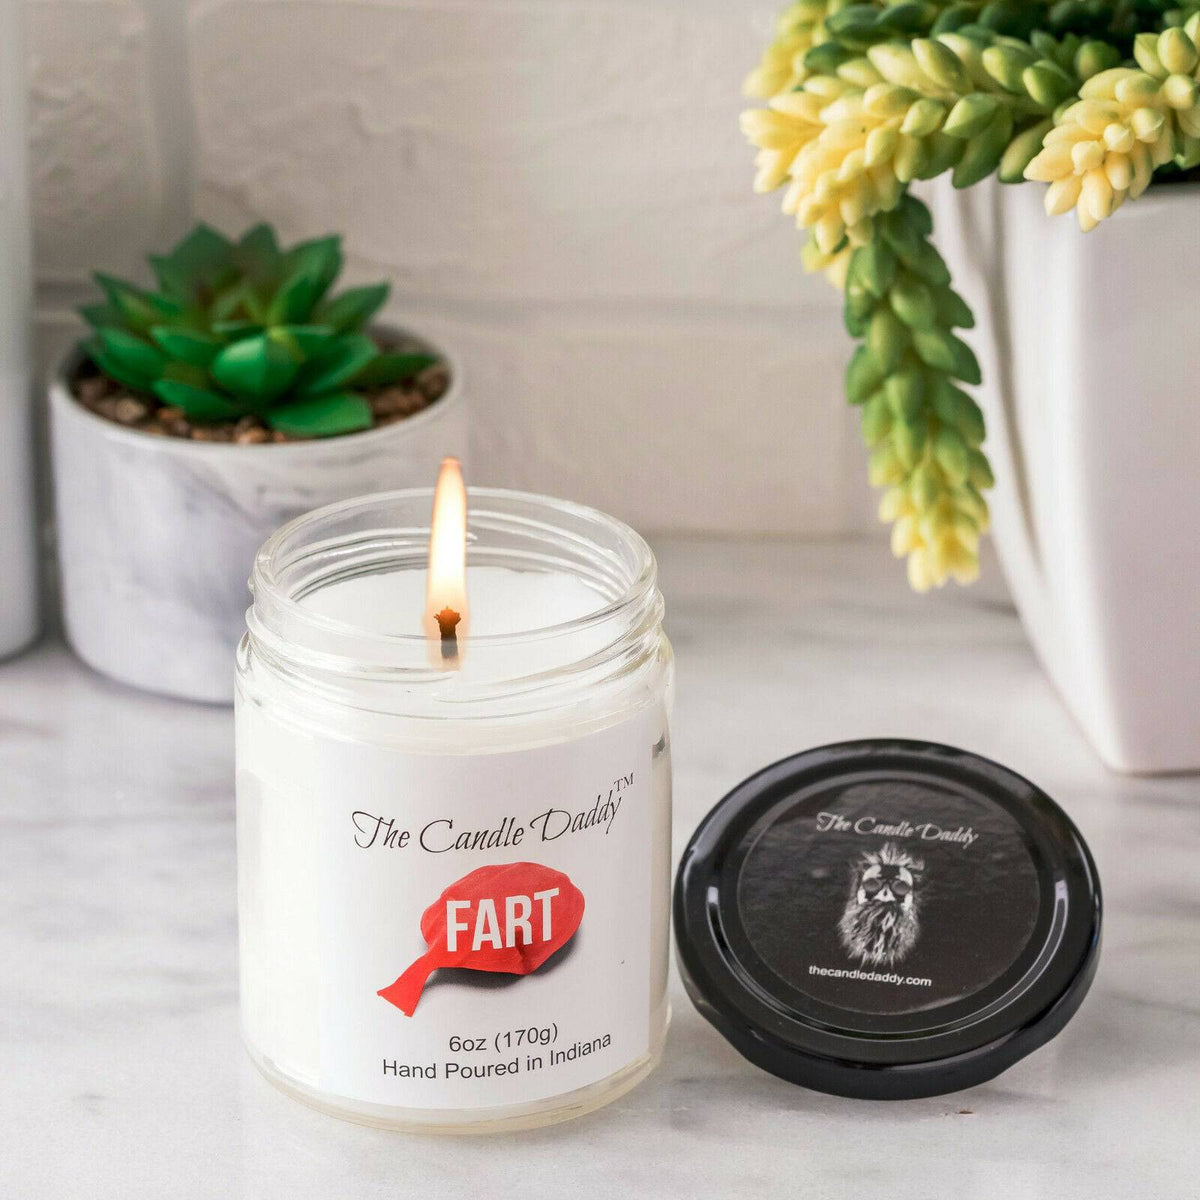 Shart - Terrible Near Shit Scented Candle- Smells Horrible- - Funny 6 oz  Jar Candle- 40 hour burn time